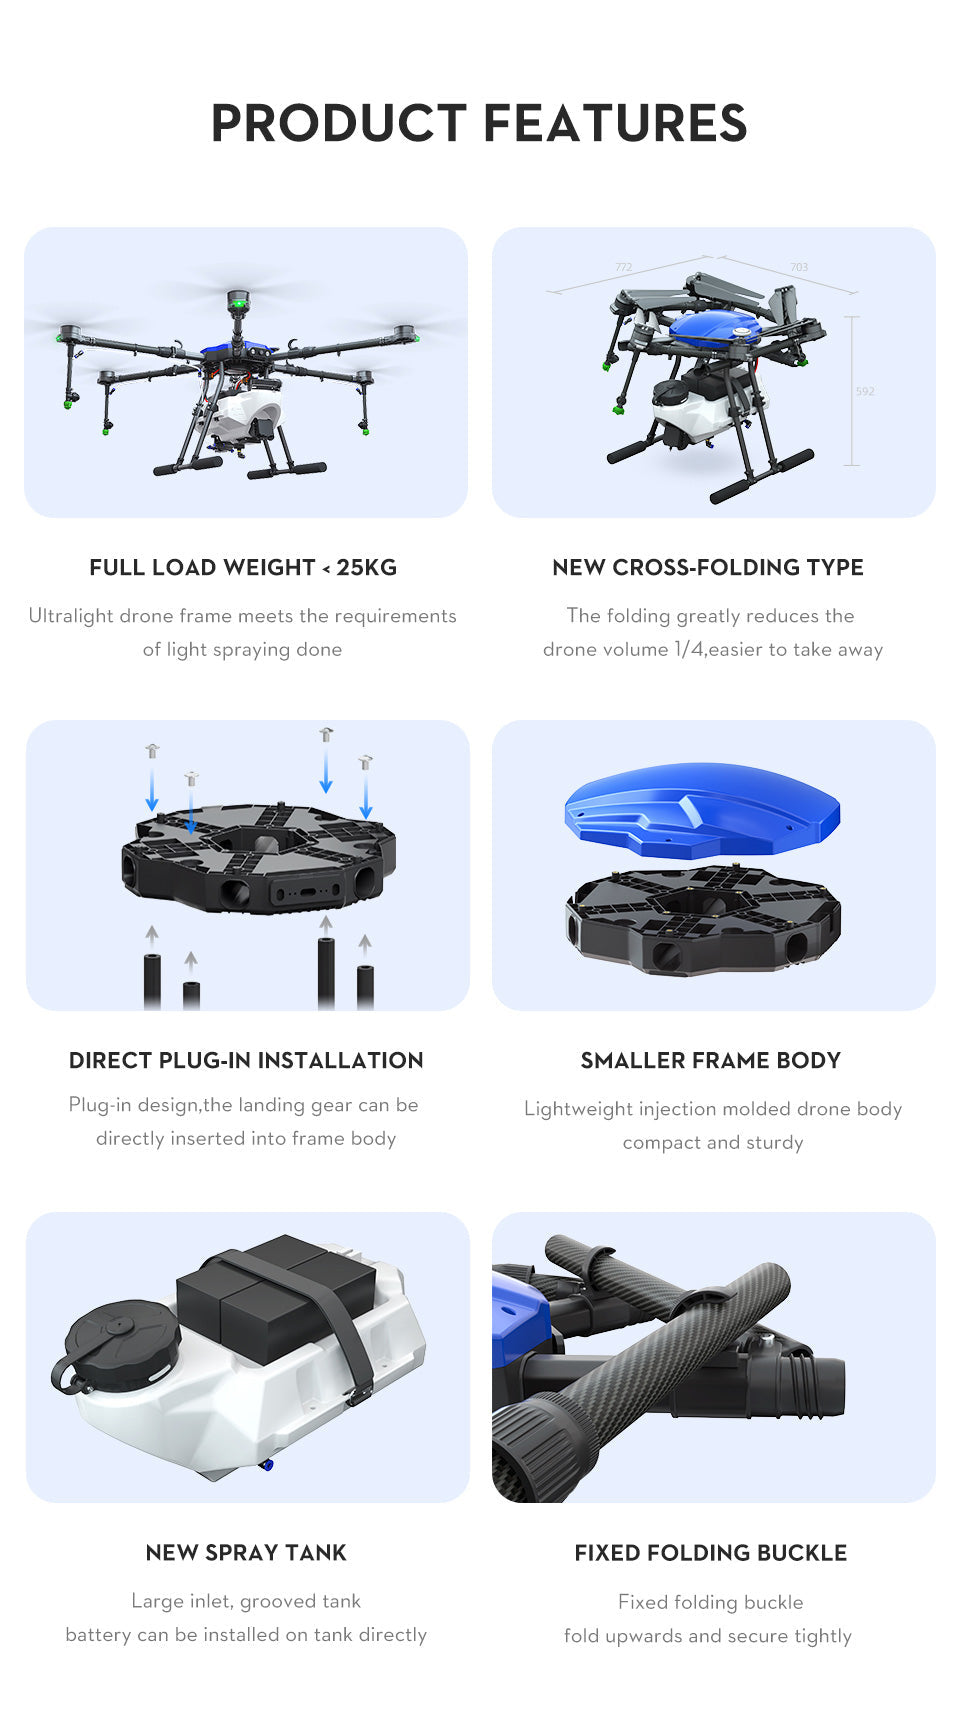 EFT E610M 10L Agriculture Drone, Ultralight drone frame reduces volume by 75% for easy transport.